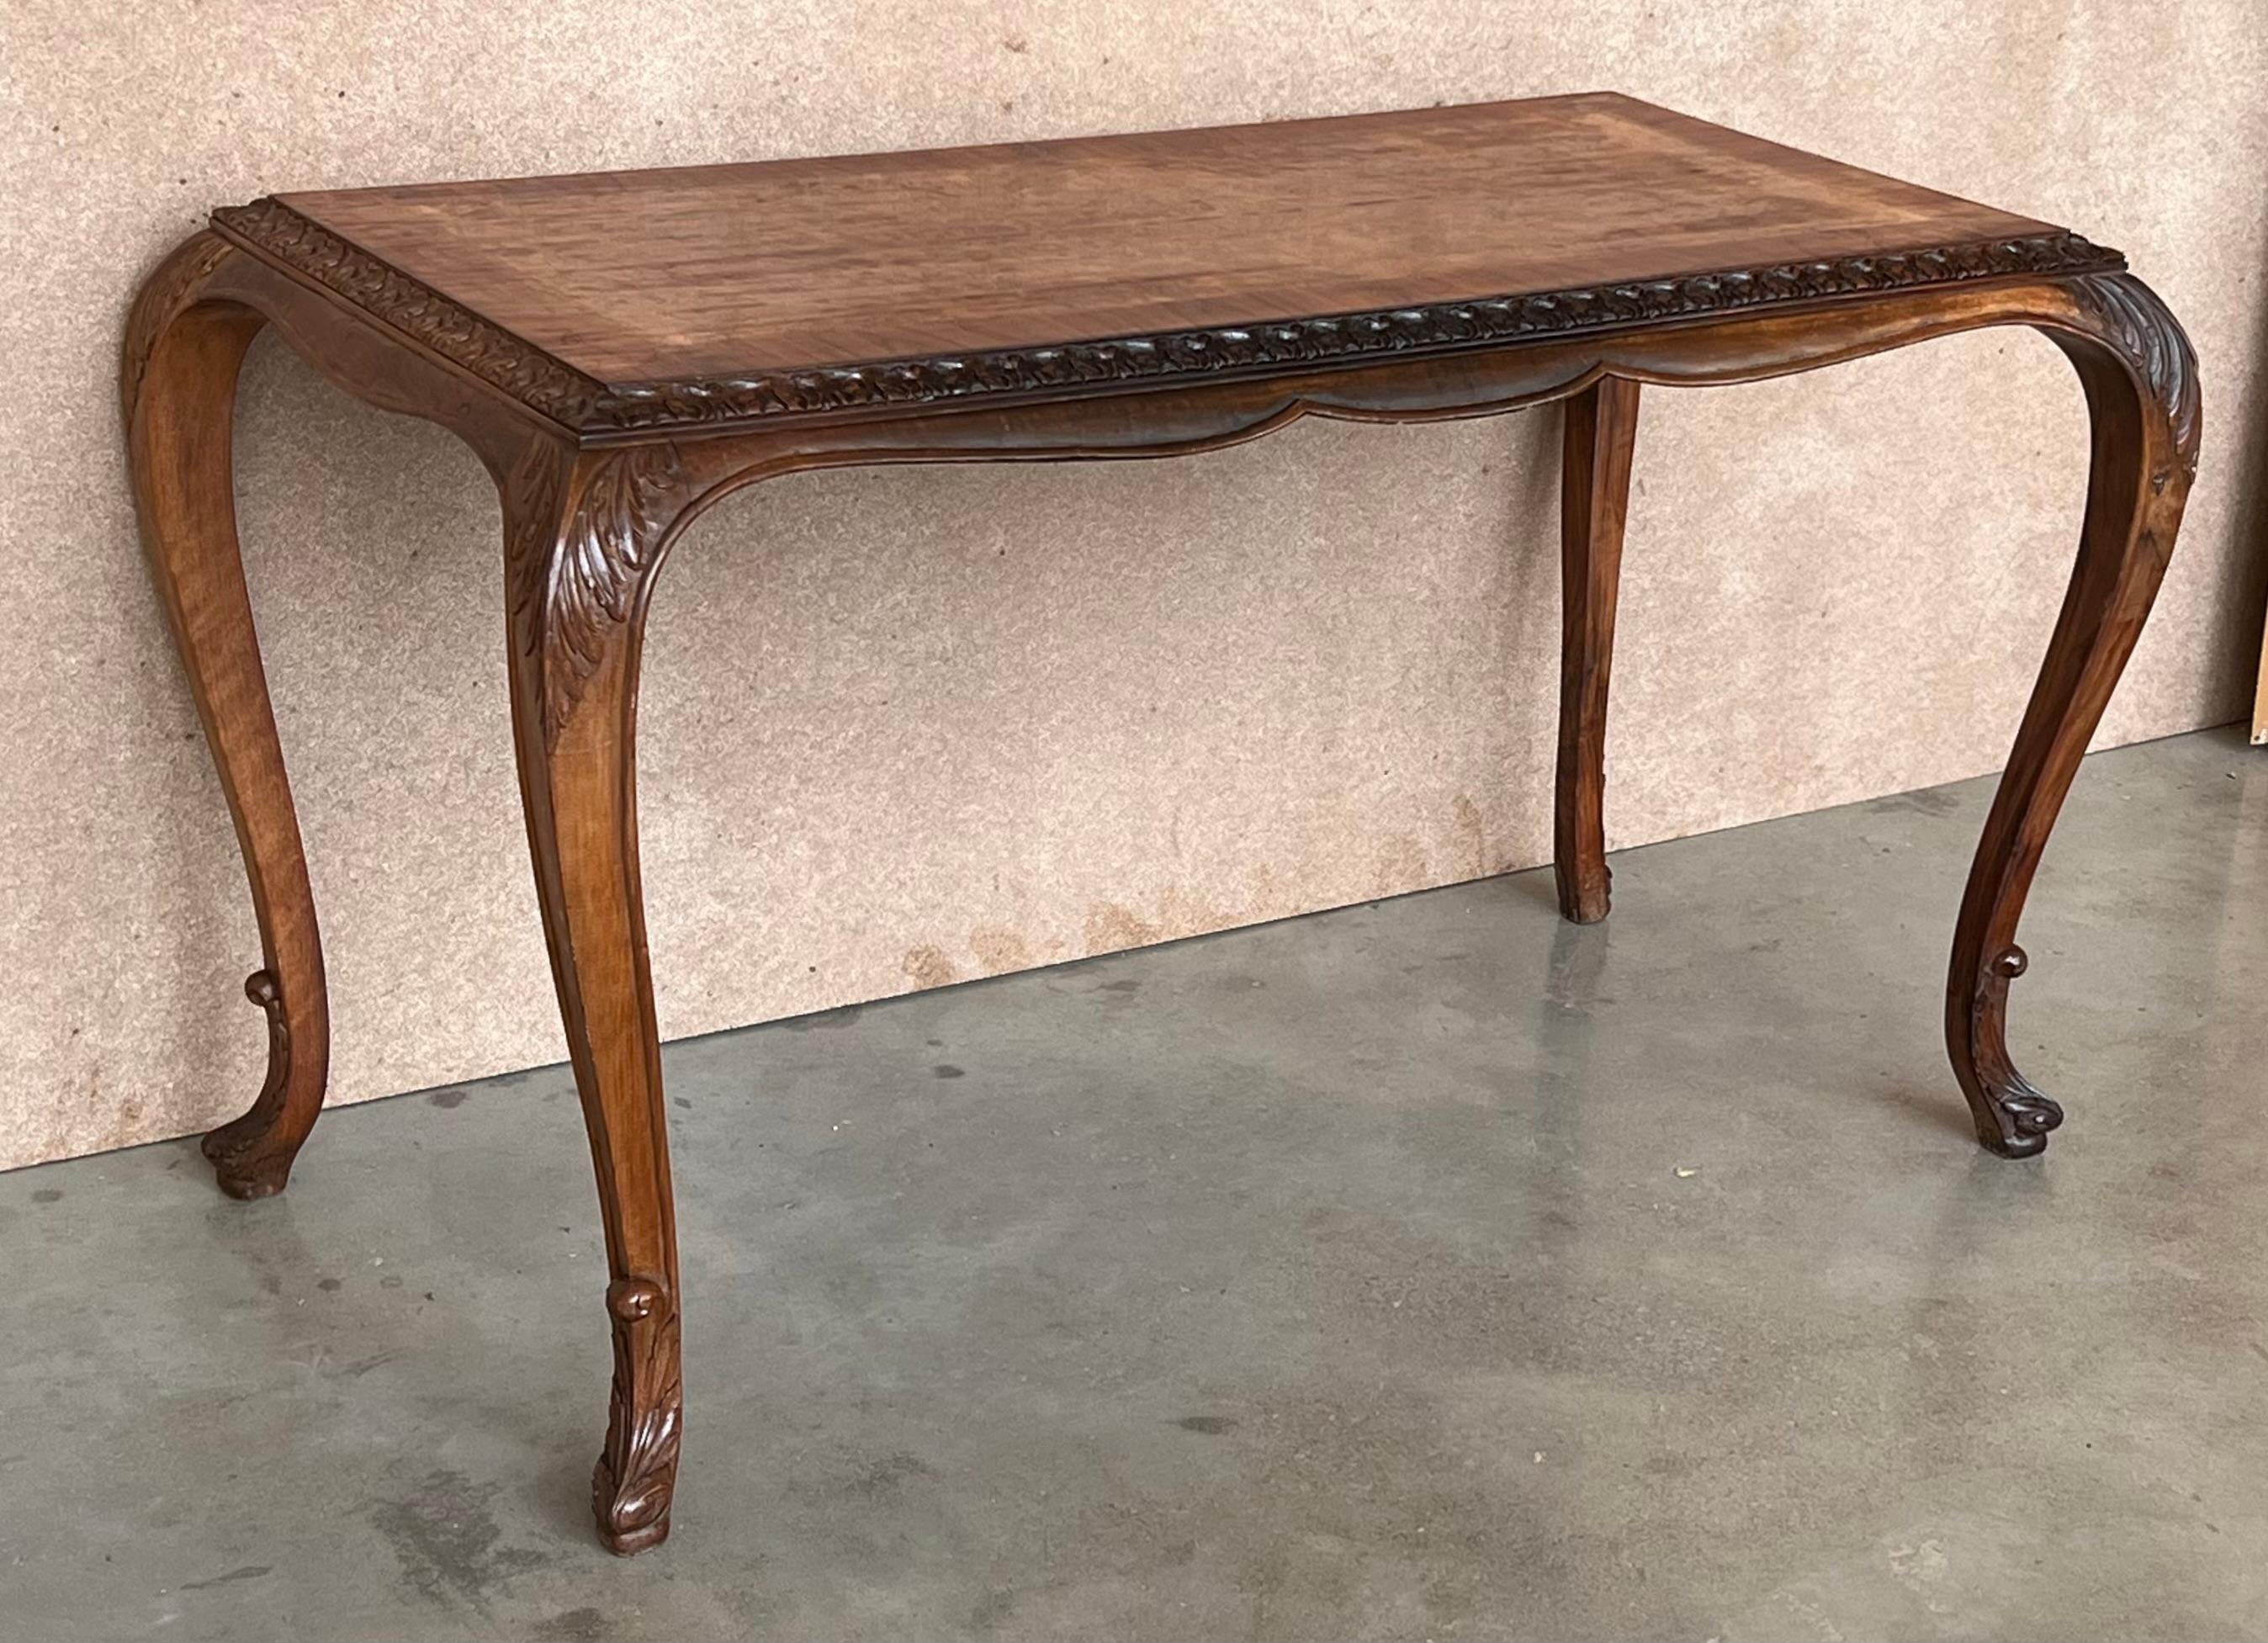 Antique Burl Walnut Queen Anne Style Rectangular Coffee Table In Good Condition For Sale In Miami, FL